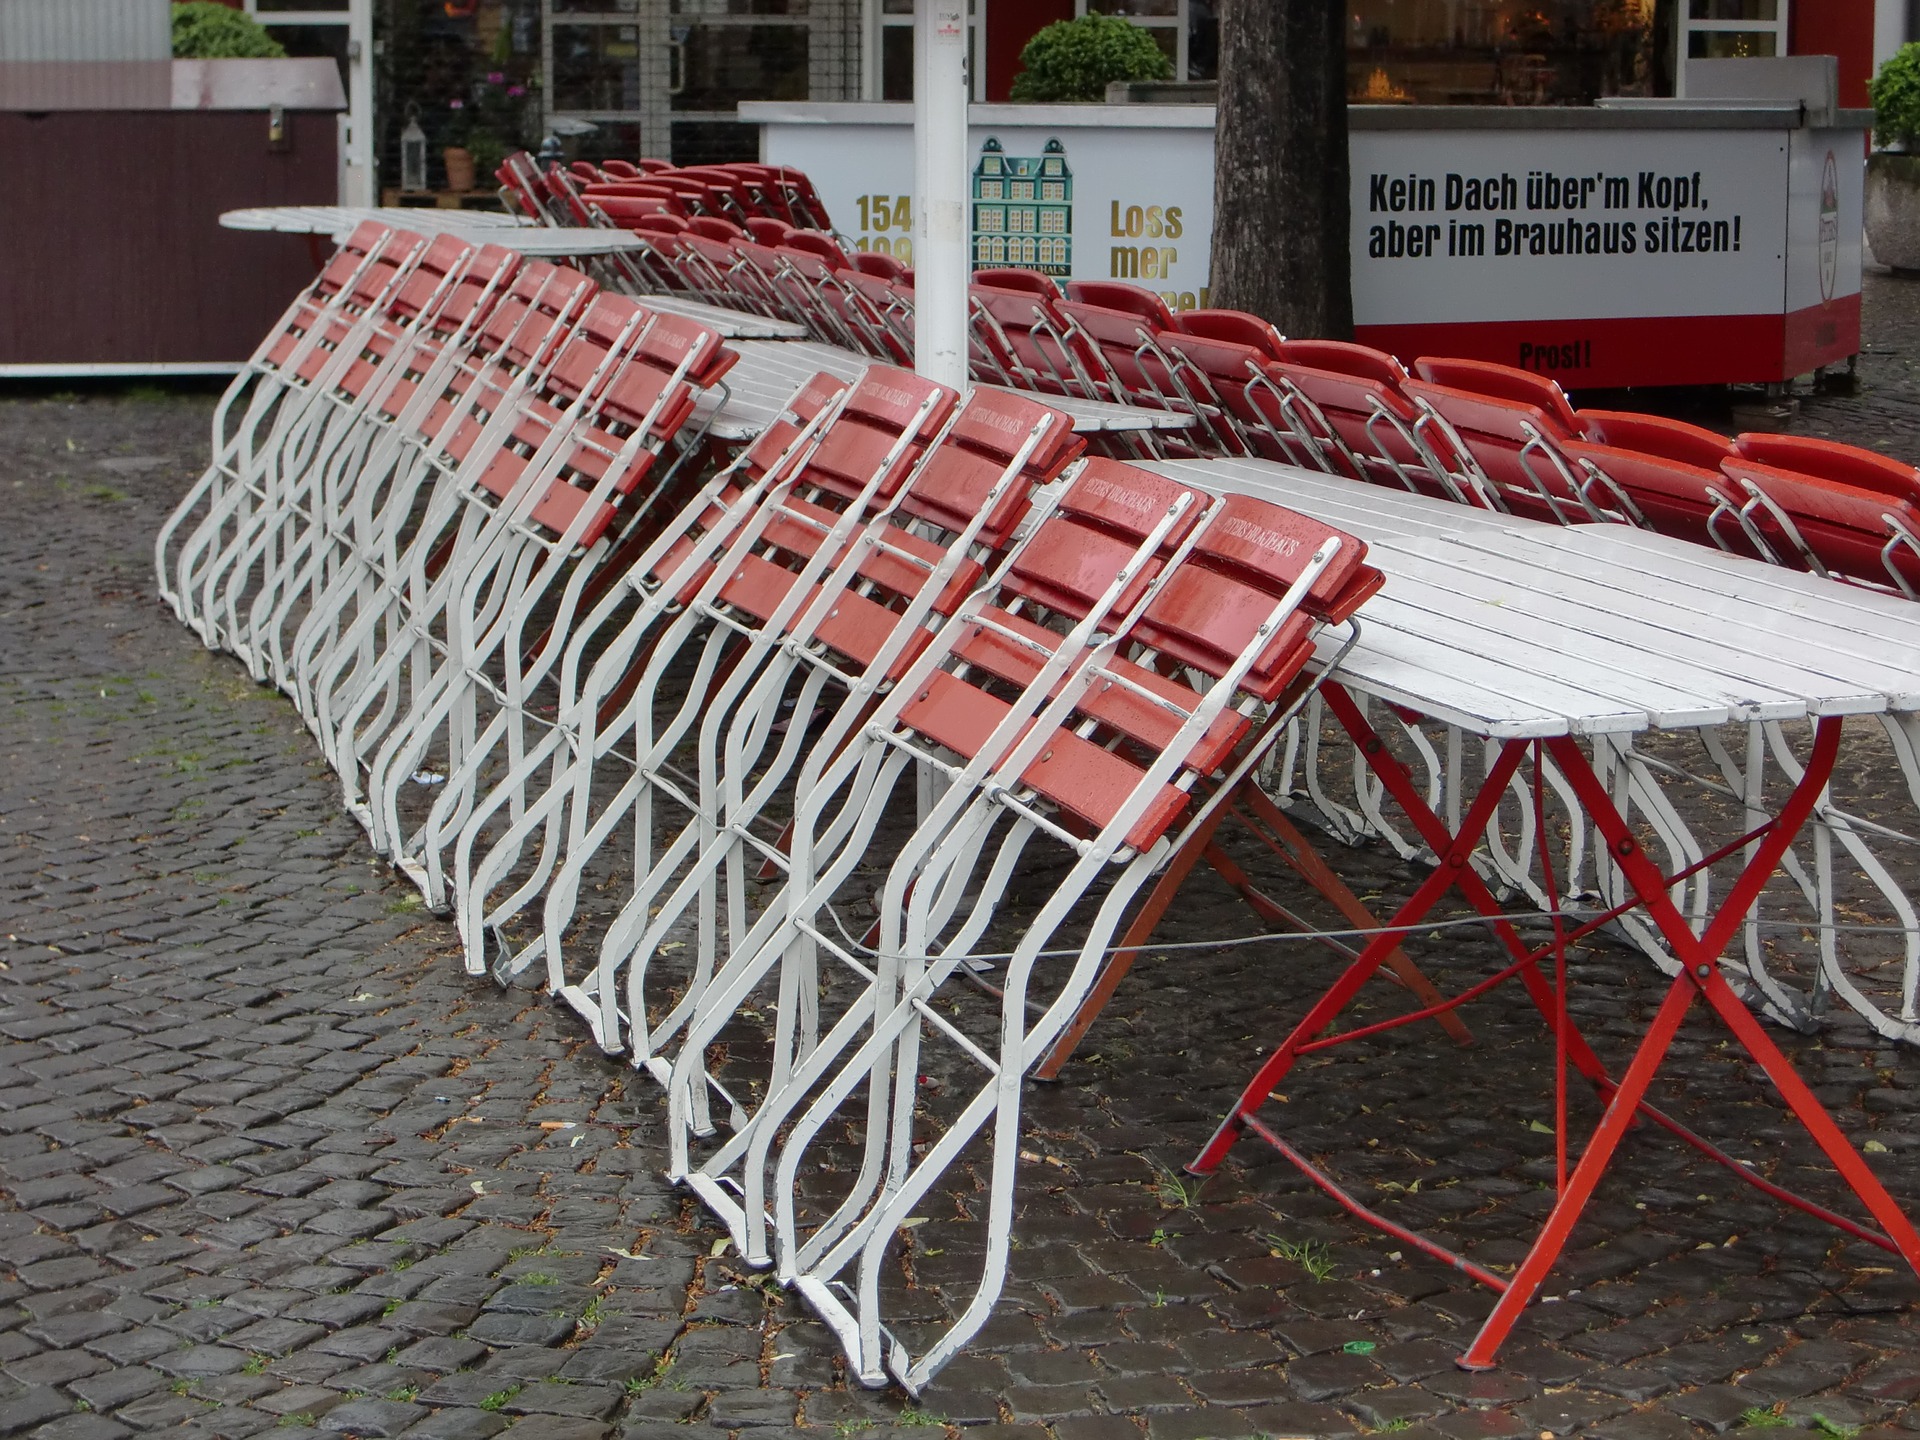 Cheapest Folding Chairs - Where to Buy Cheap Folding Chairs